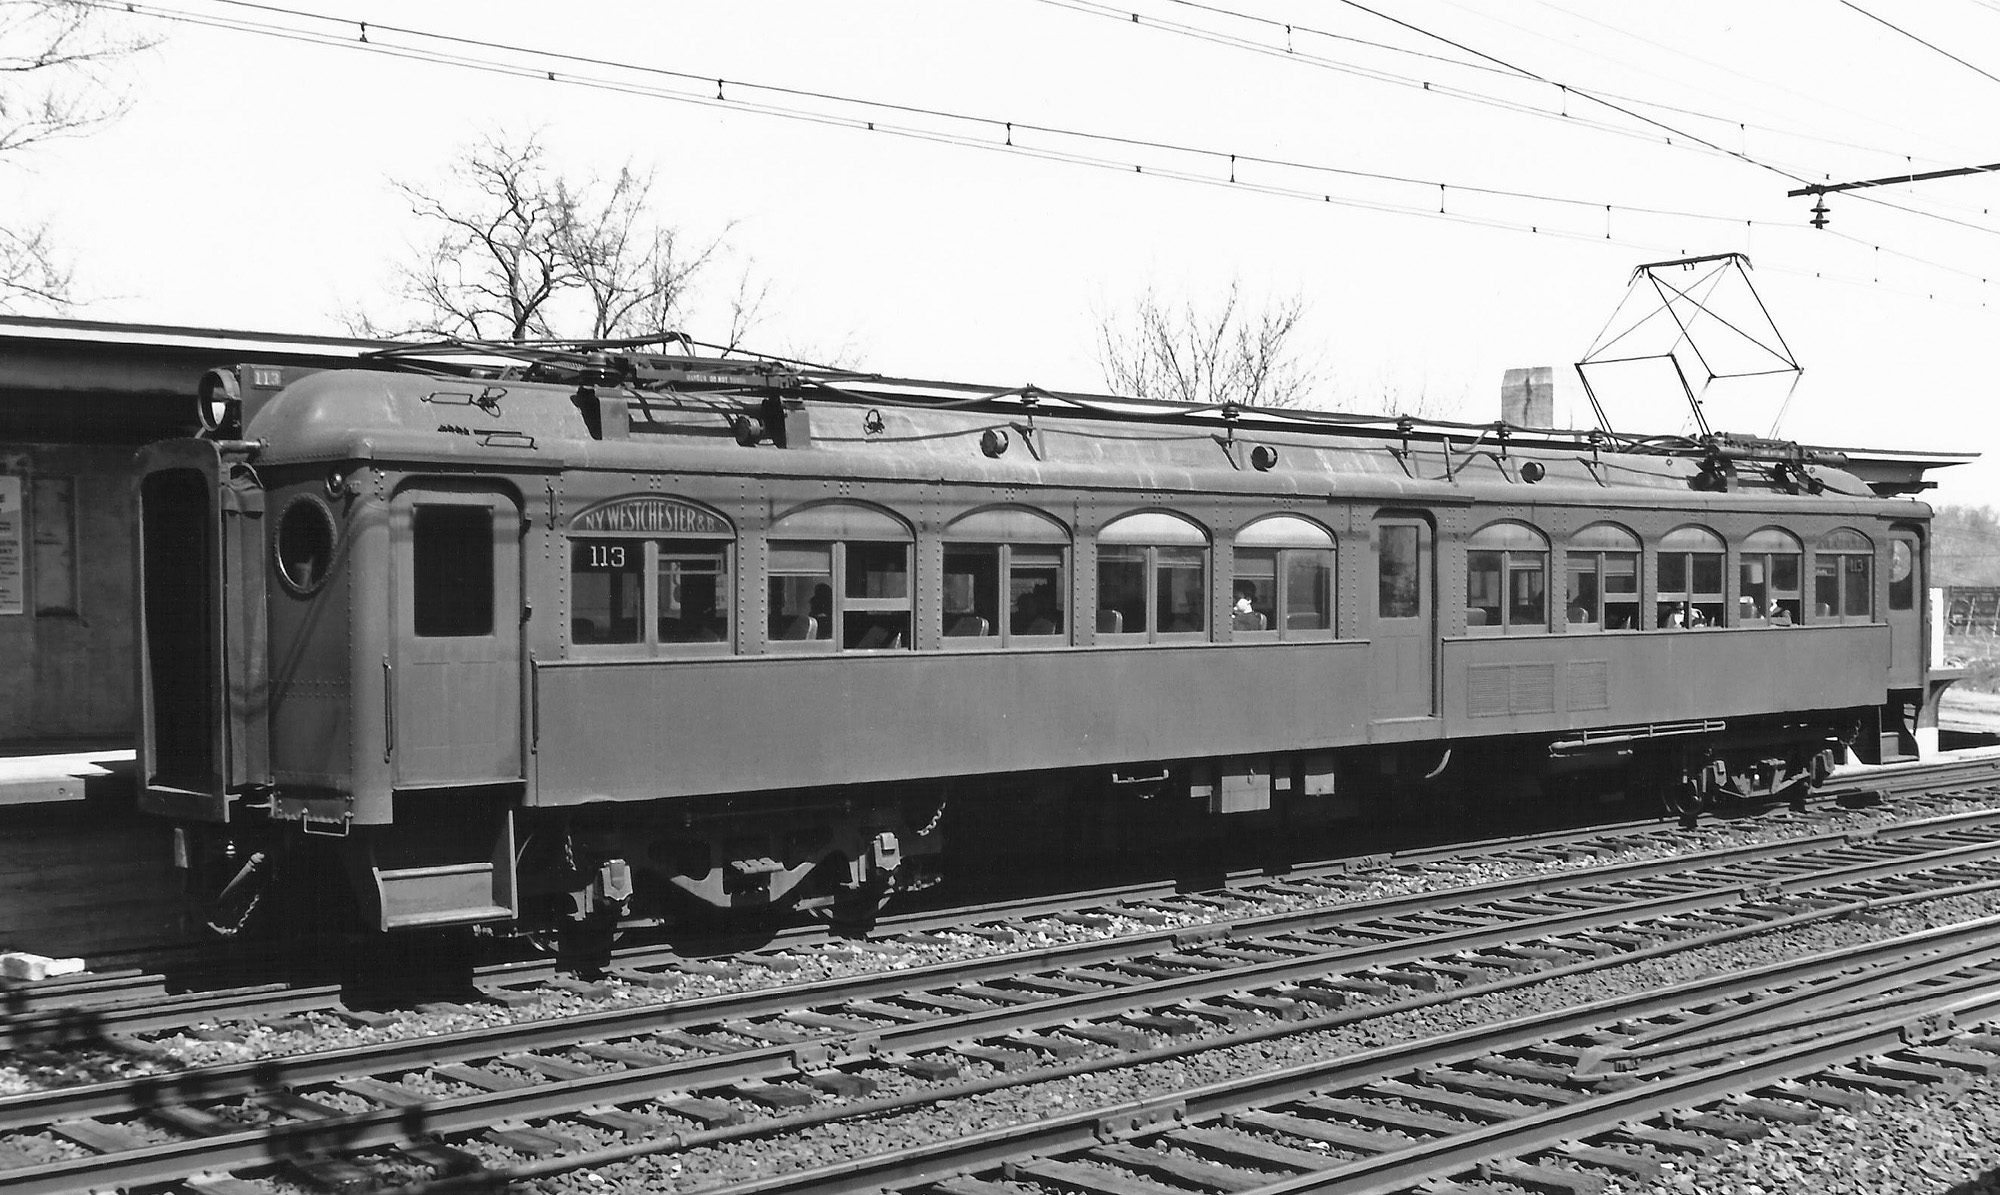 Pictured is a multiple unit electric passenger car of the New York, Westchester and Boston Railway at the Baychester Avenue Station, Bronx New York in May of 1937. “The Westchester” as it was known locally was a rapid transit system that linked the Bronx with White Plains to the north of New York City and subsequently Port Chester to the east. At the time of the railway's construction in 1912, the NYW & B was one of the most advanced systems in the world with state of the art equipment, signaling, overhead power supply and exquisite stations of masonry and concrete in both the Italian Renaissance and Mission architectural styles. The NYW & B ceased operation in late 1937, a victim of The Great Depression, the emerging popularity of the automobile and mismanagement of its parent company, the New Haven Railroad. View full size.